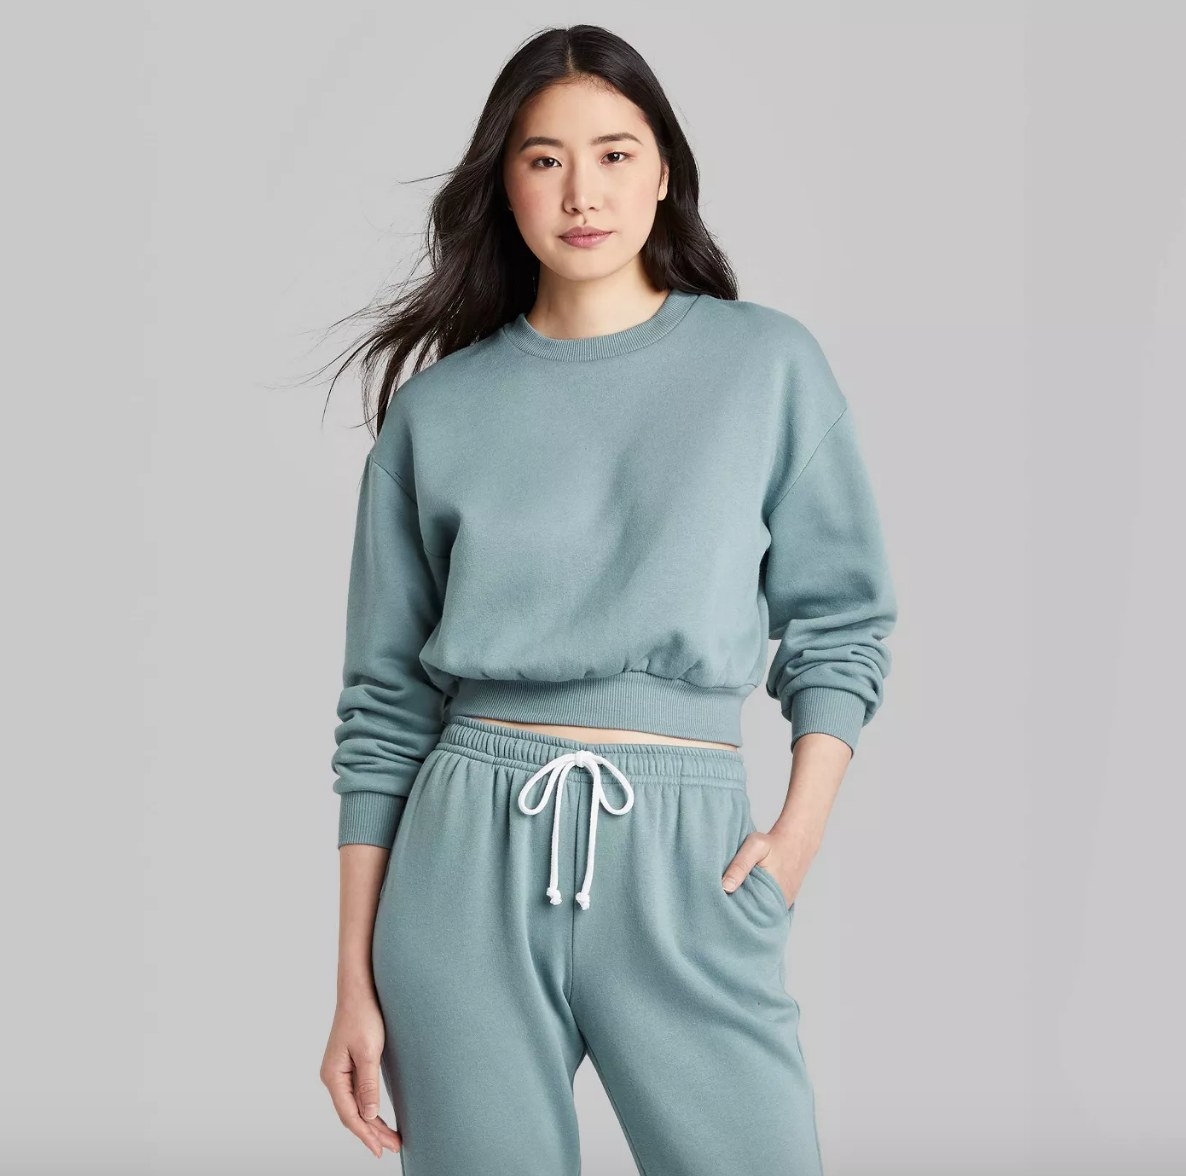 Model wearing blue cropped crew neck with matching sweatpants